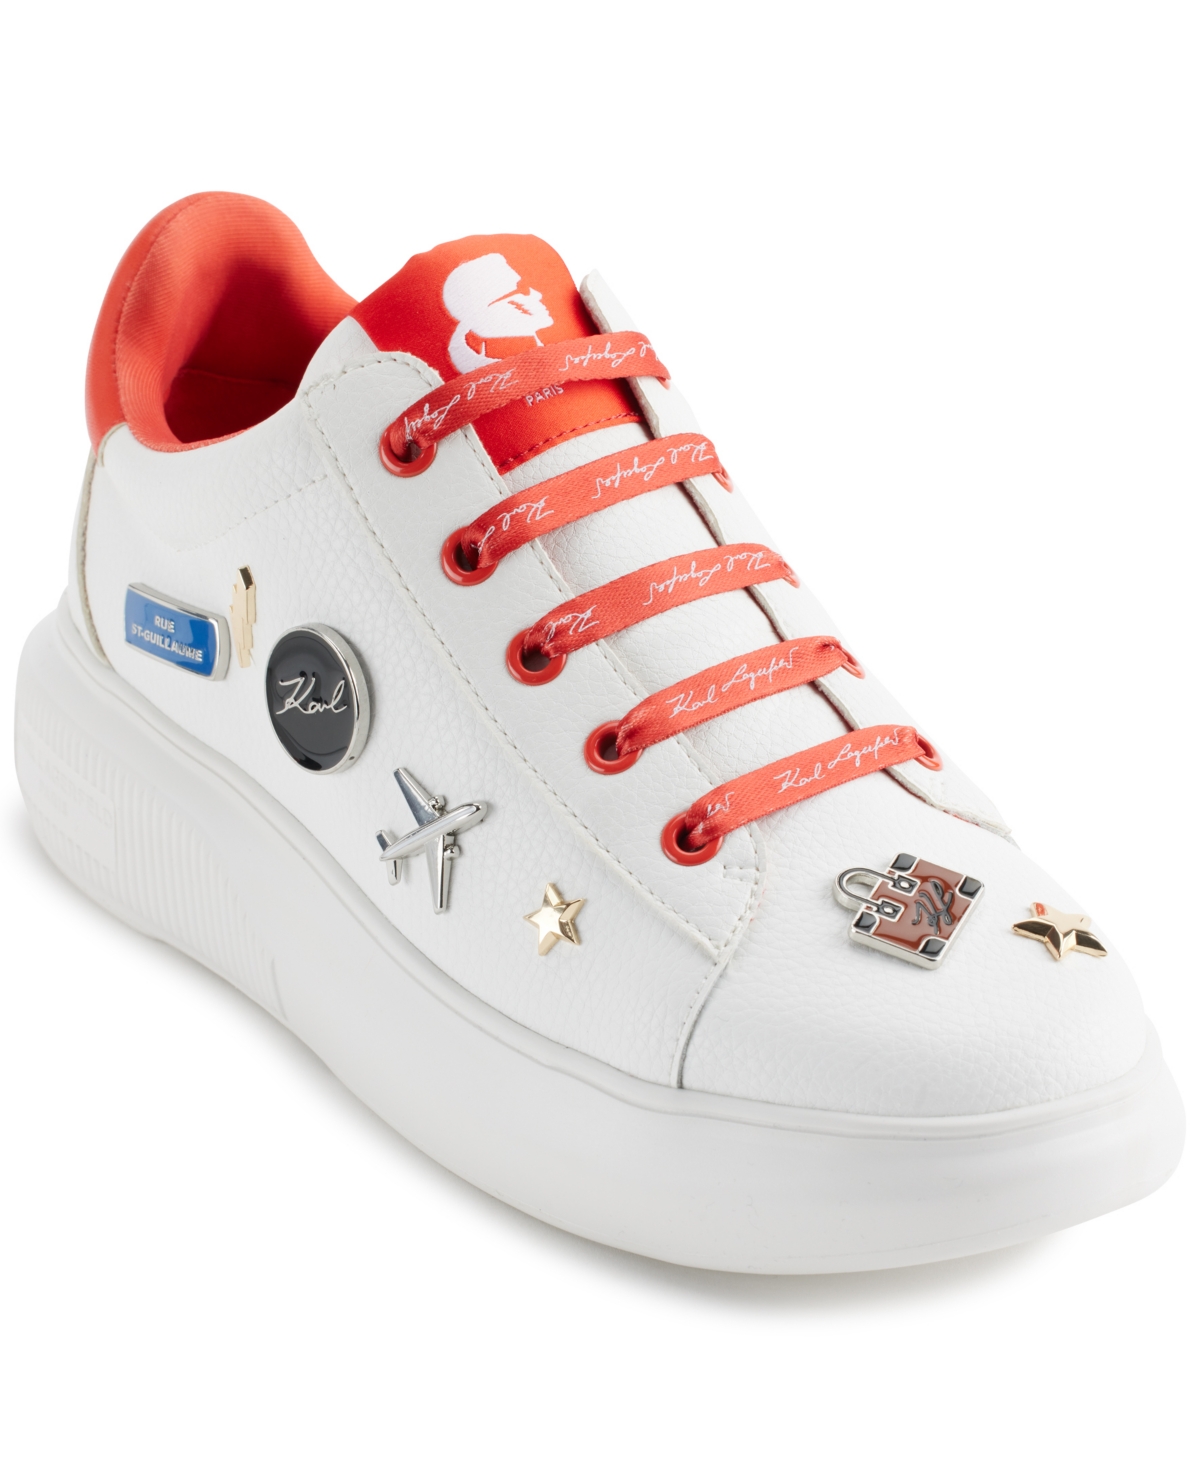 Karl Lagerfeld Justina Lace Up Platform Sneakers In Bright White,vermillion